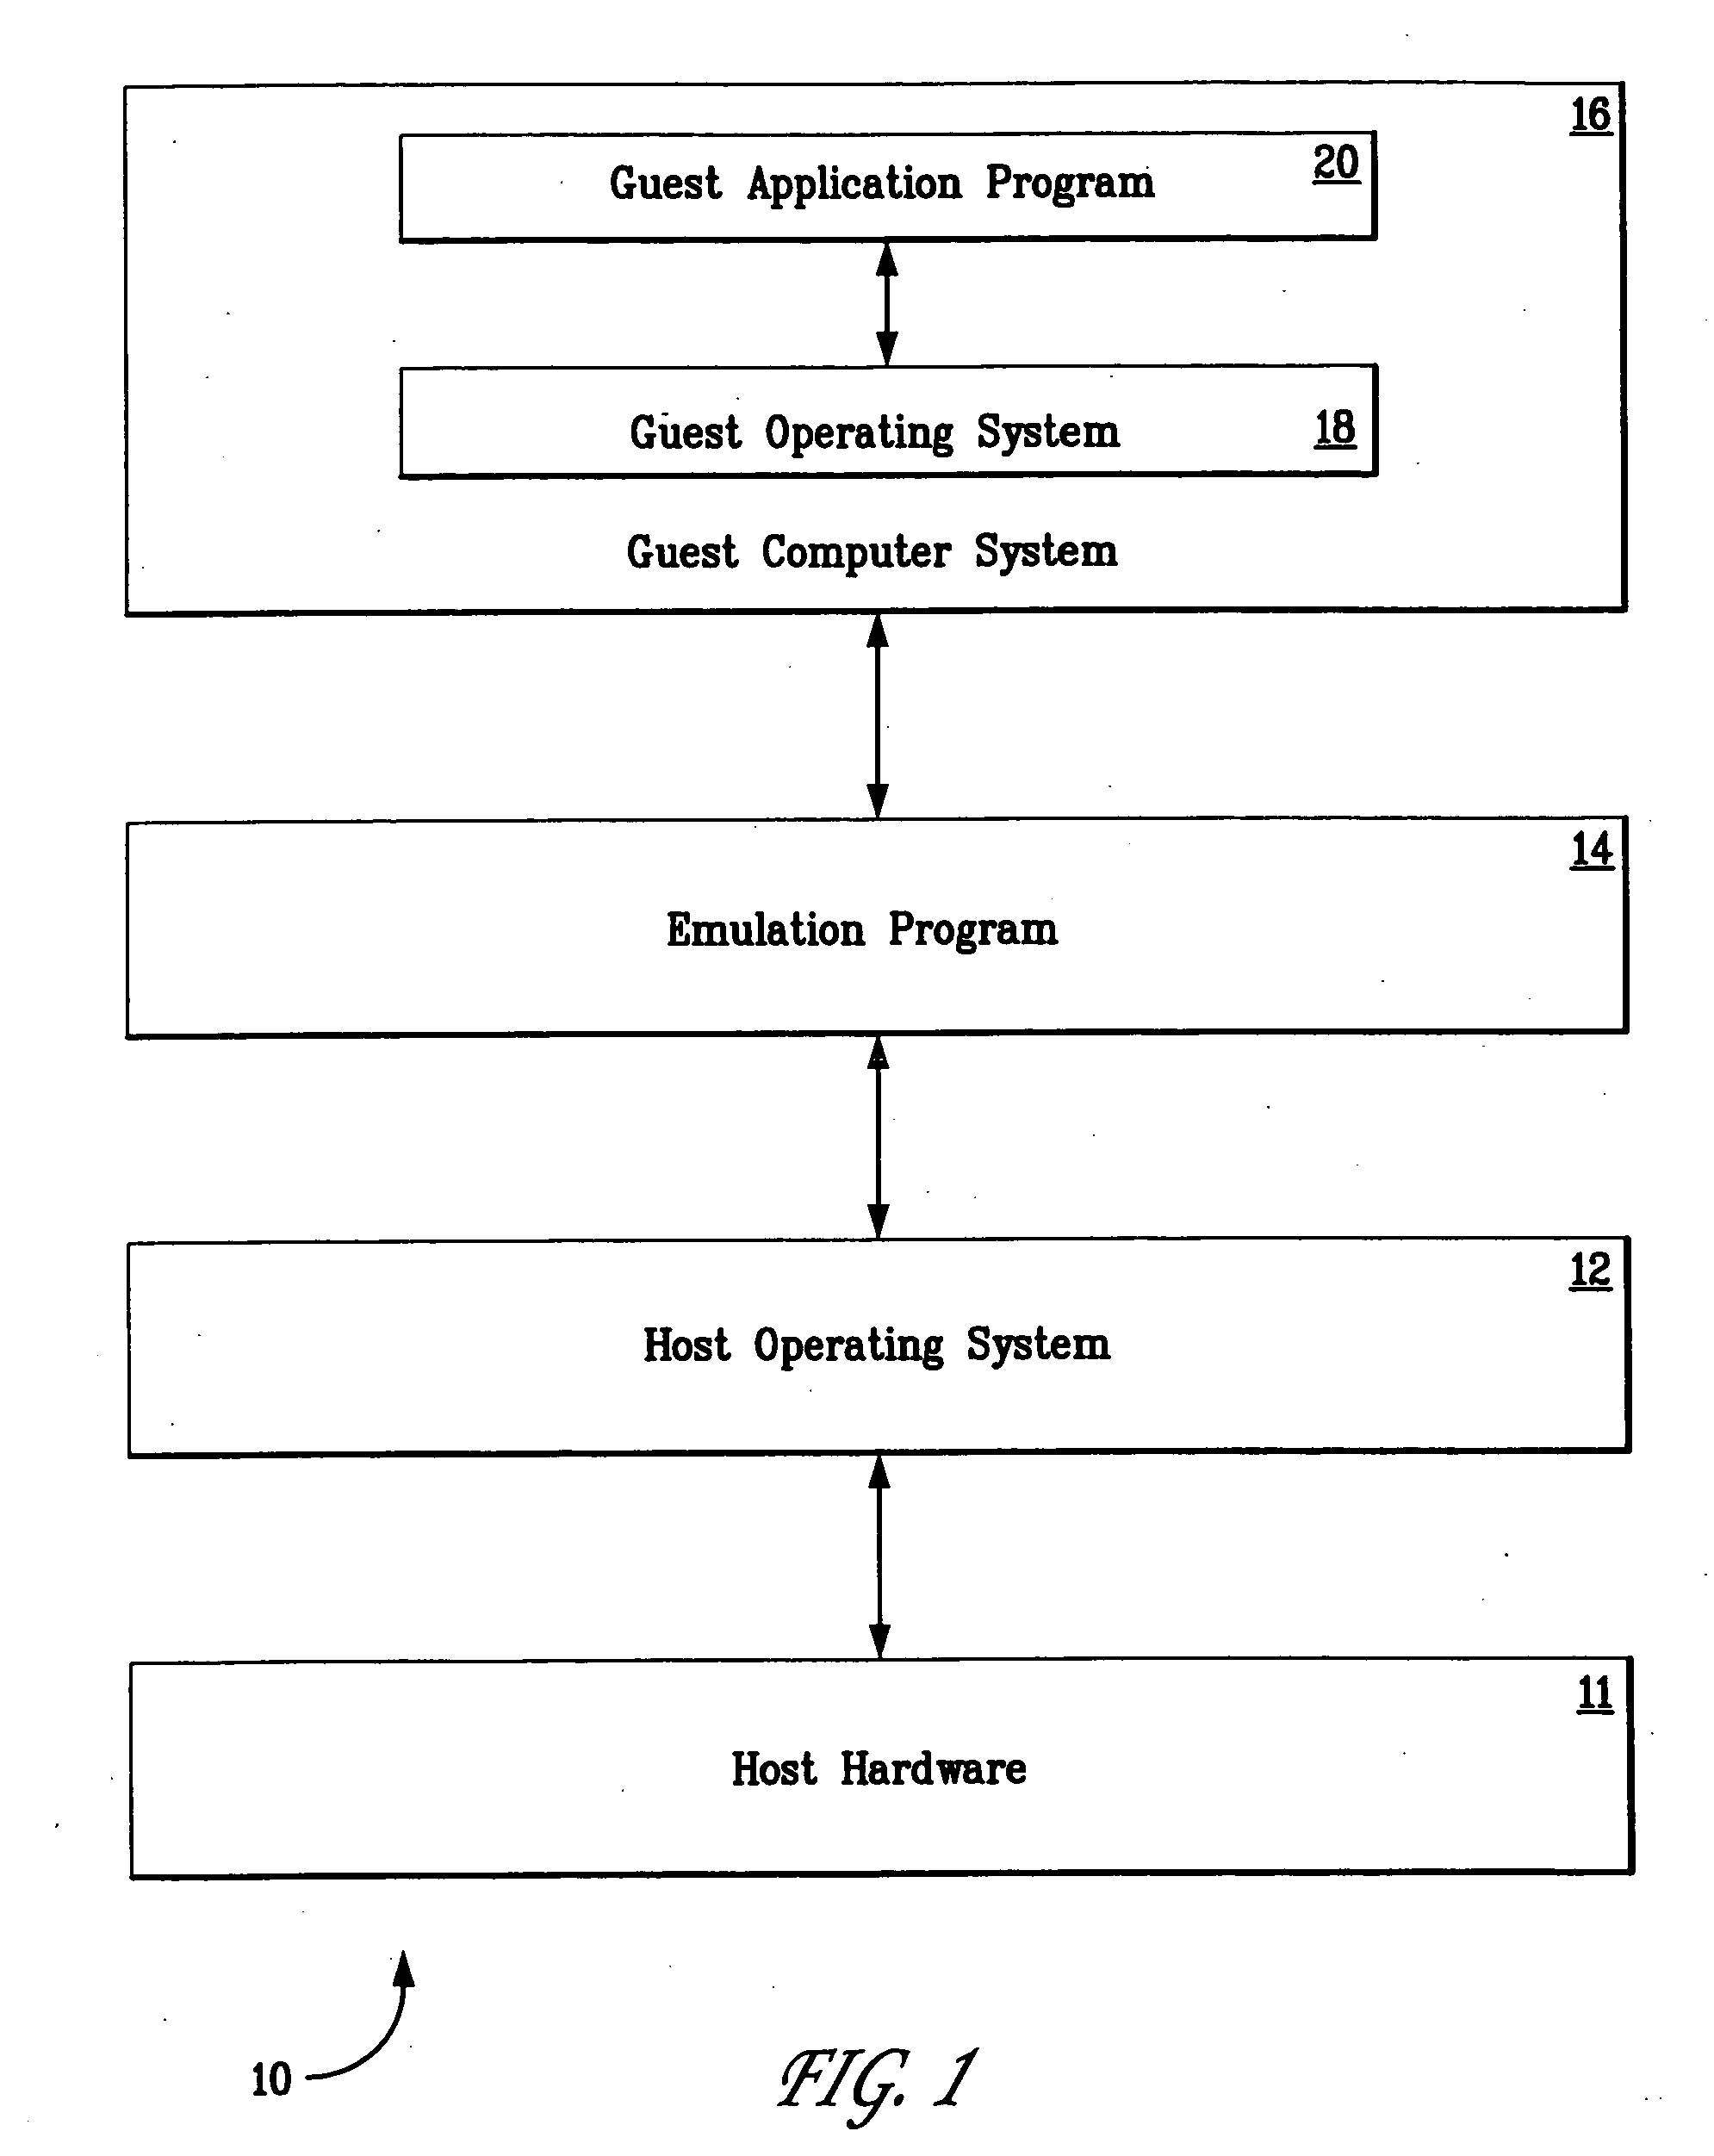 Allocation of processor resources in an emulated computing environment